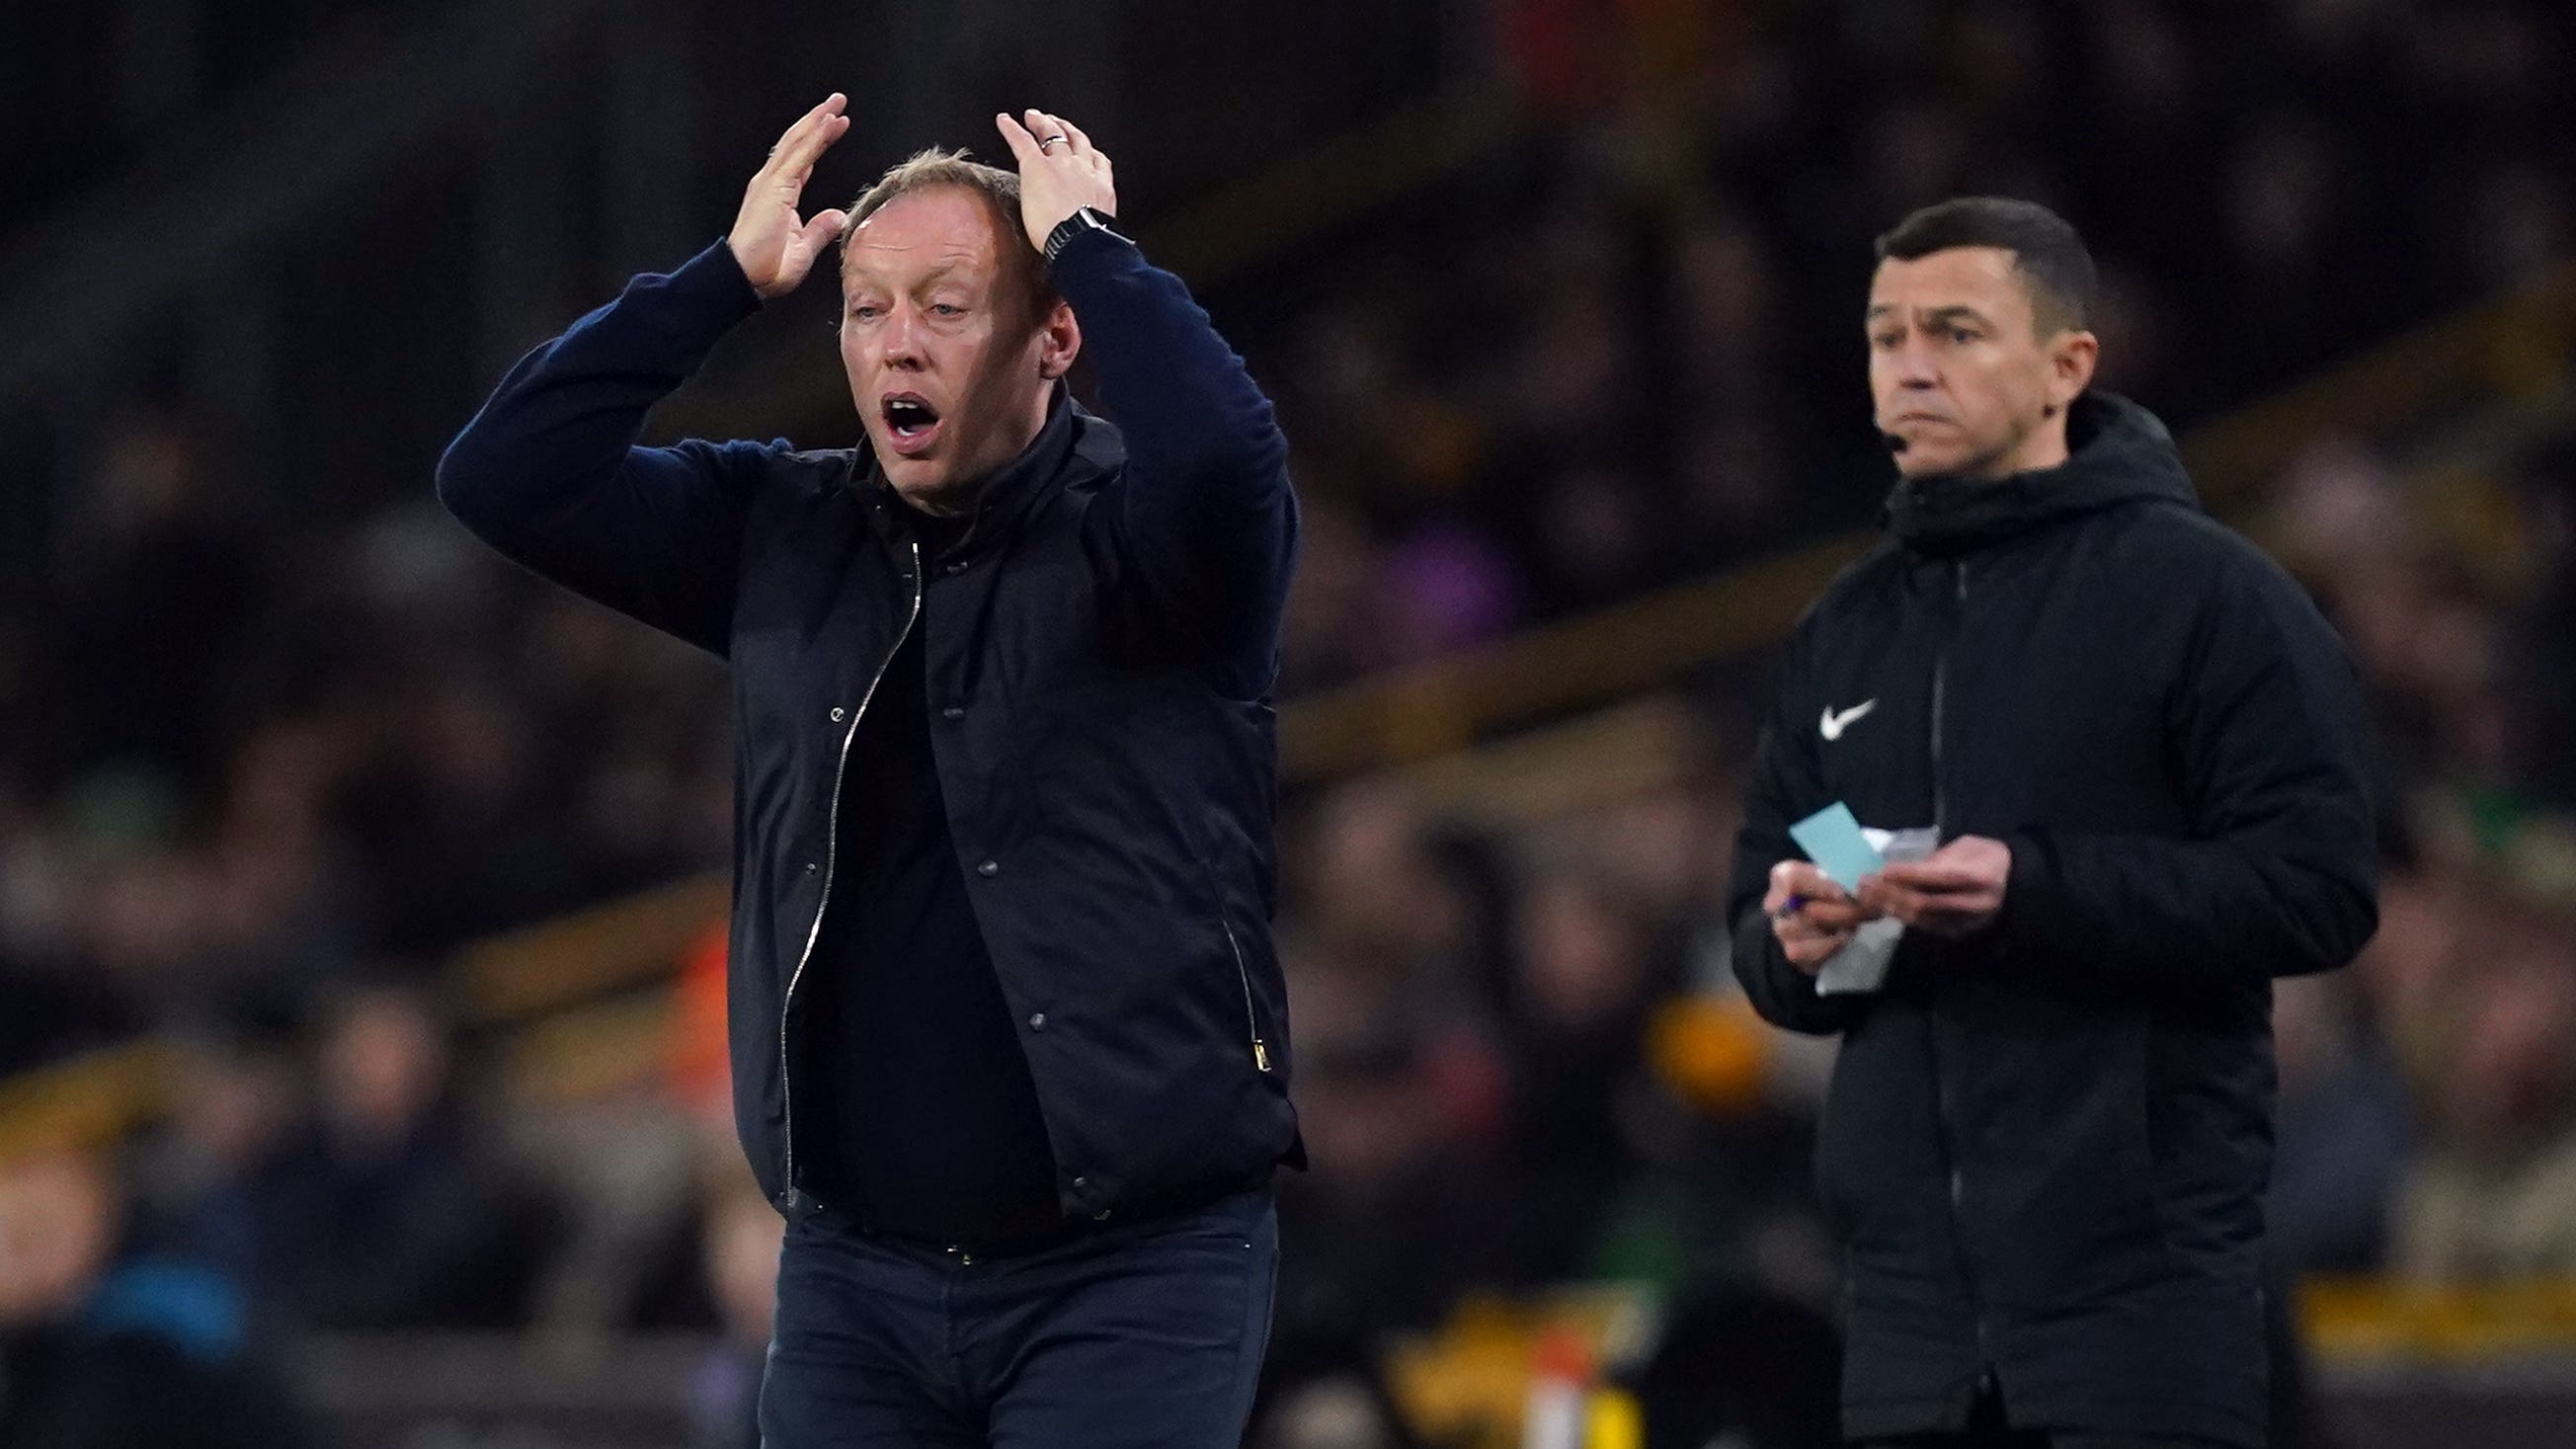 Steve Cooper boosted as battling Forest earn a point at Wolves